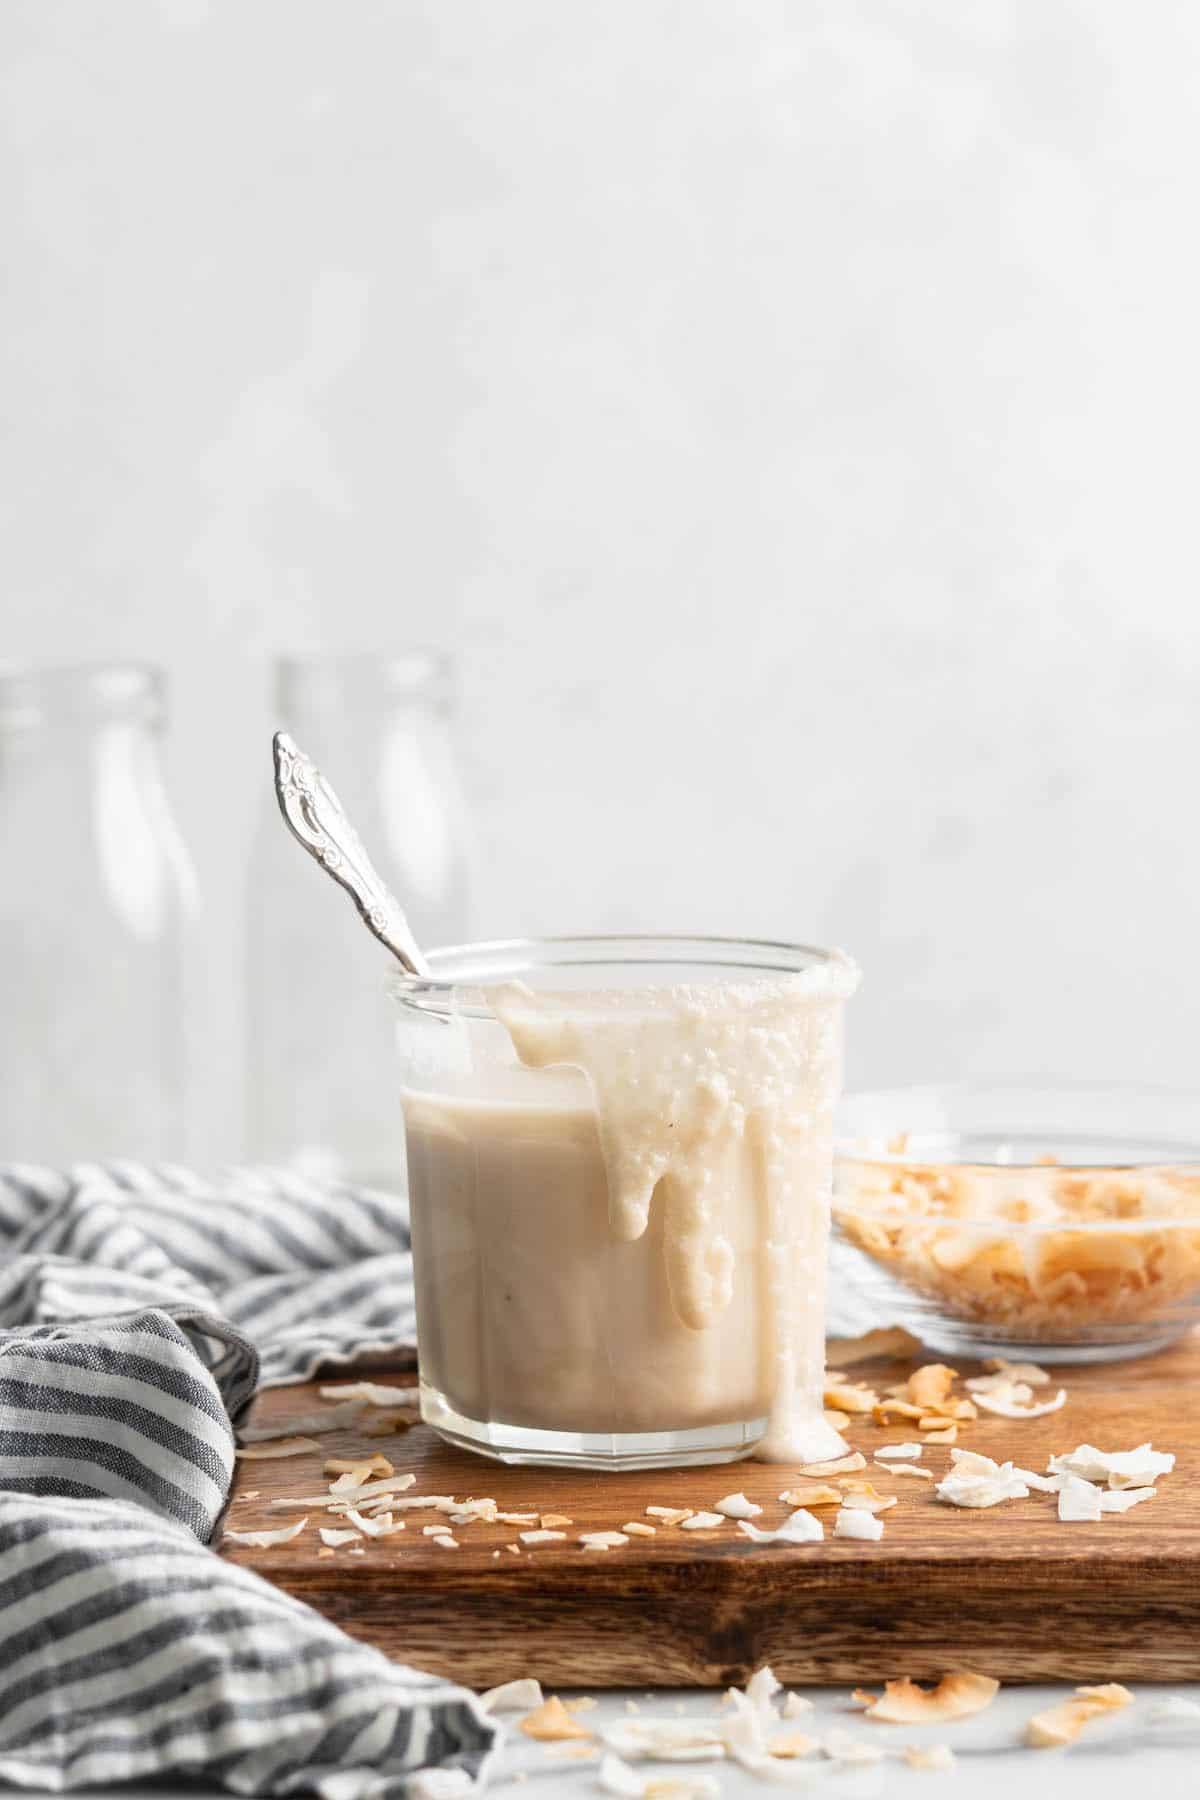 Jar of coconut butter with spoon